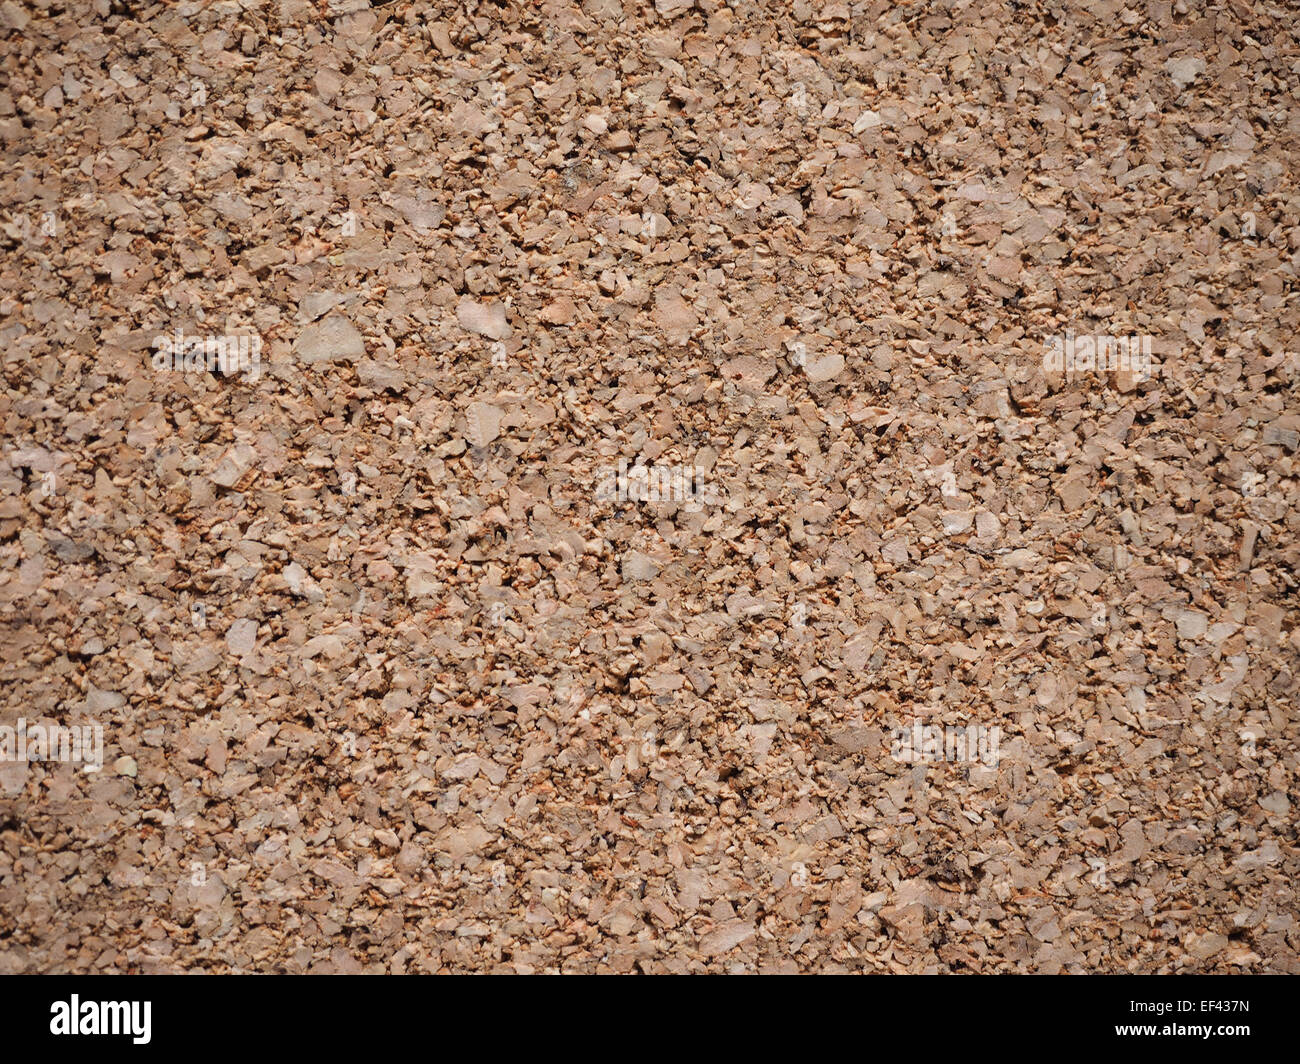 Cork material useful as a texture background Stock Photo